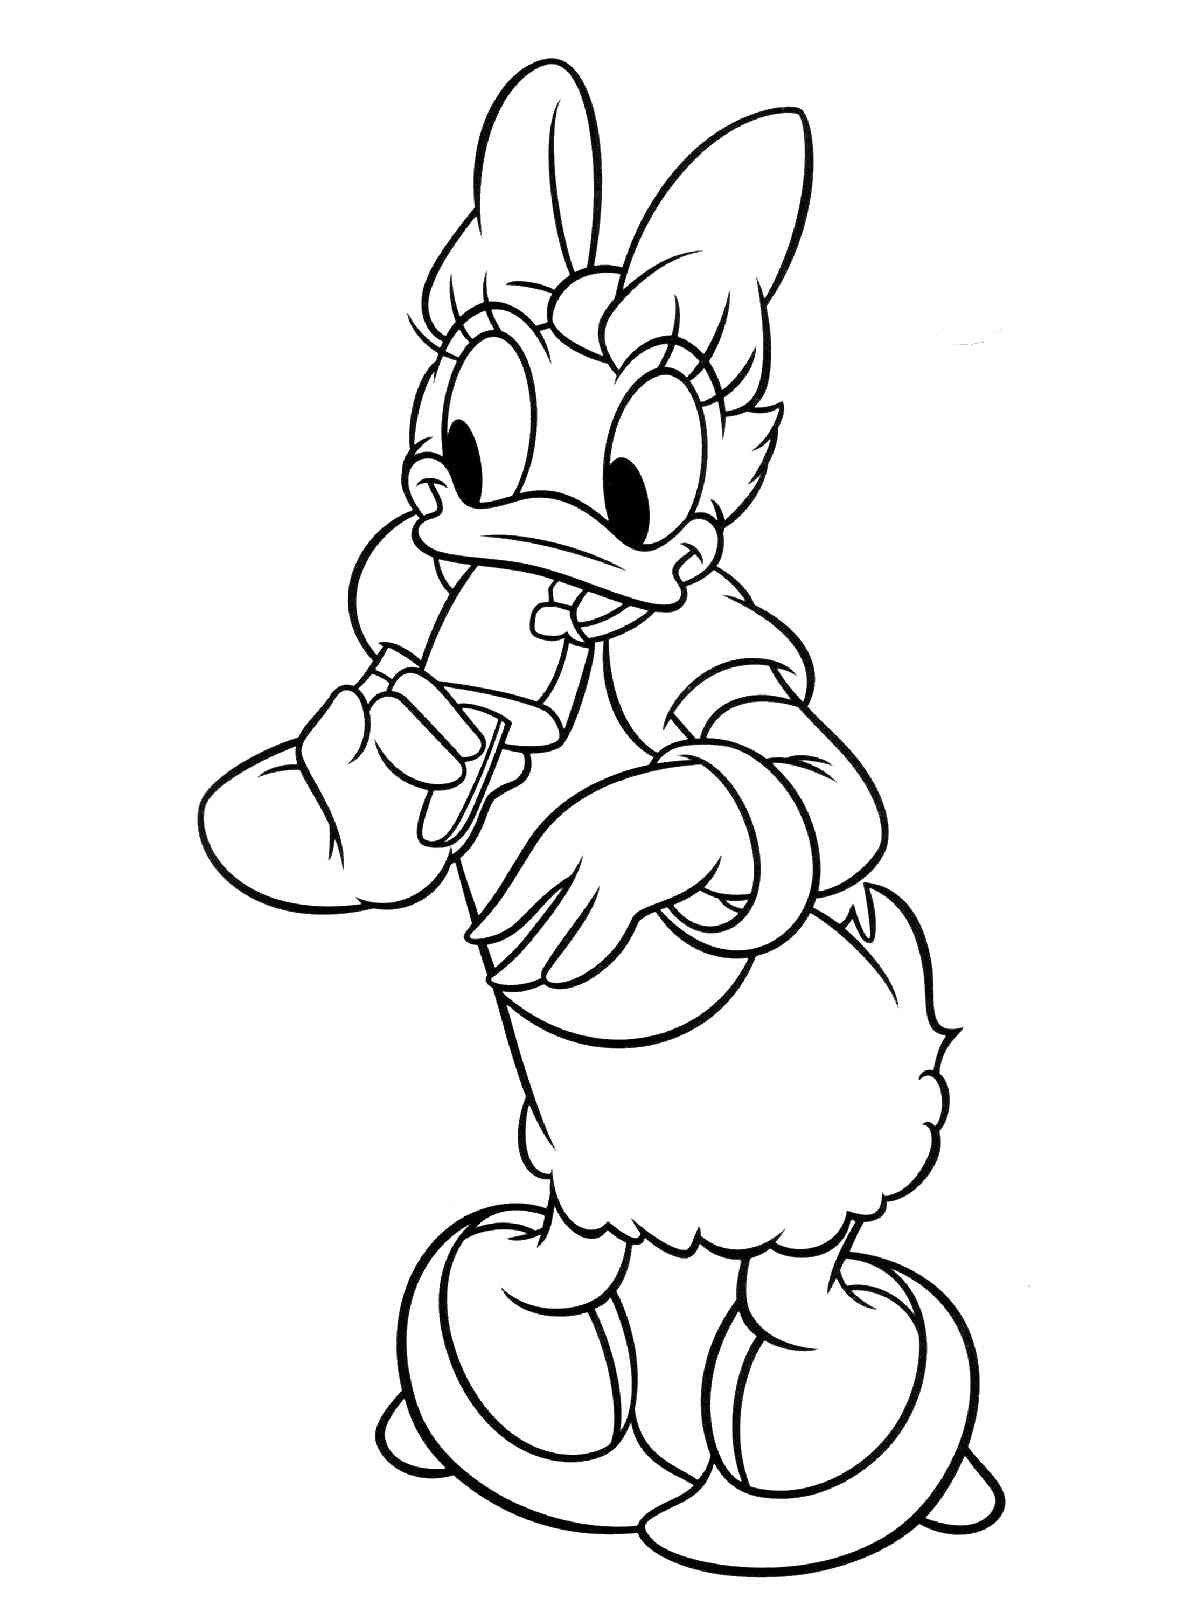 Daisy Duck 29 coloring page